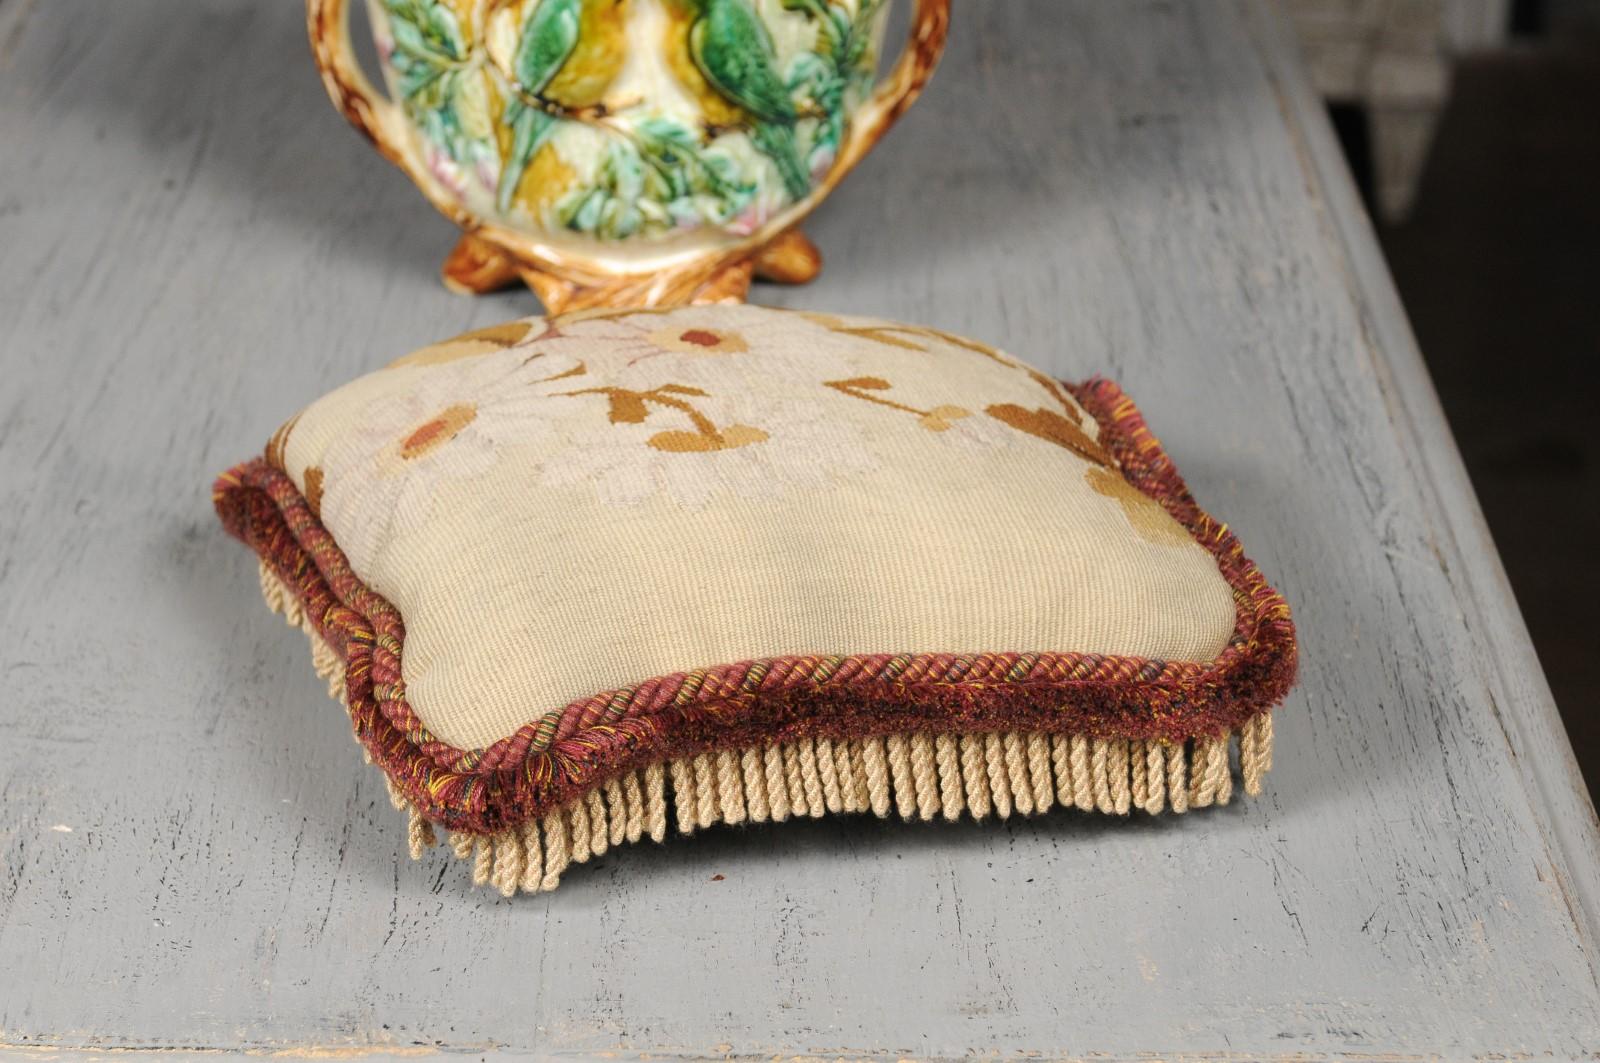 French 19th Century Floral Aubusson Tapestry Pillow with Brown Tones and Cording For Sale 6